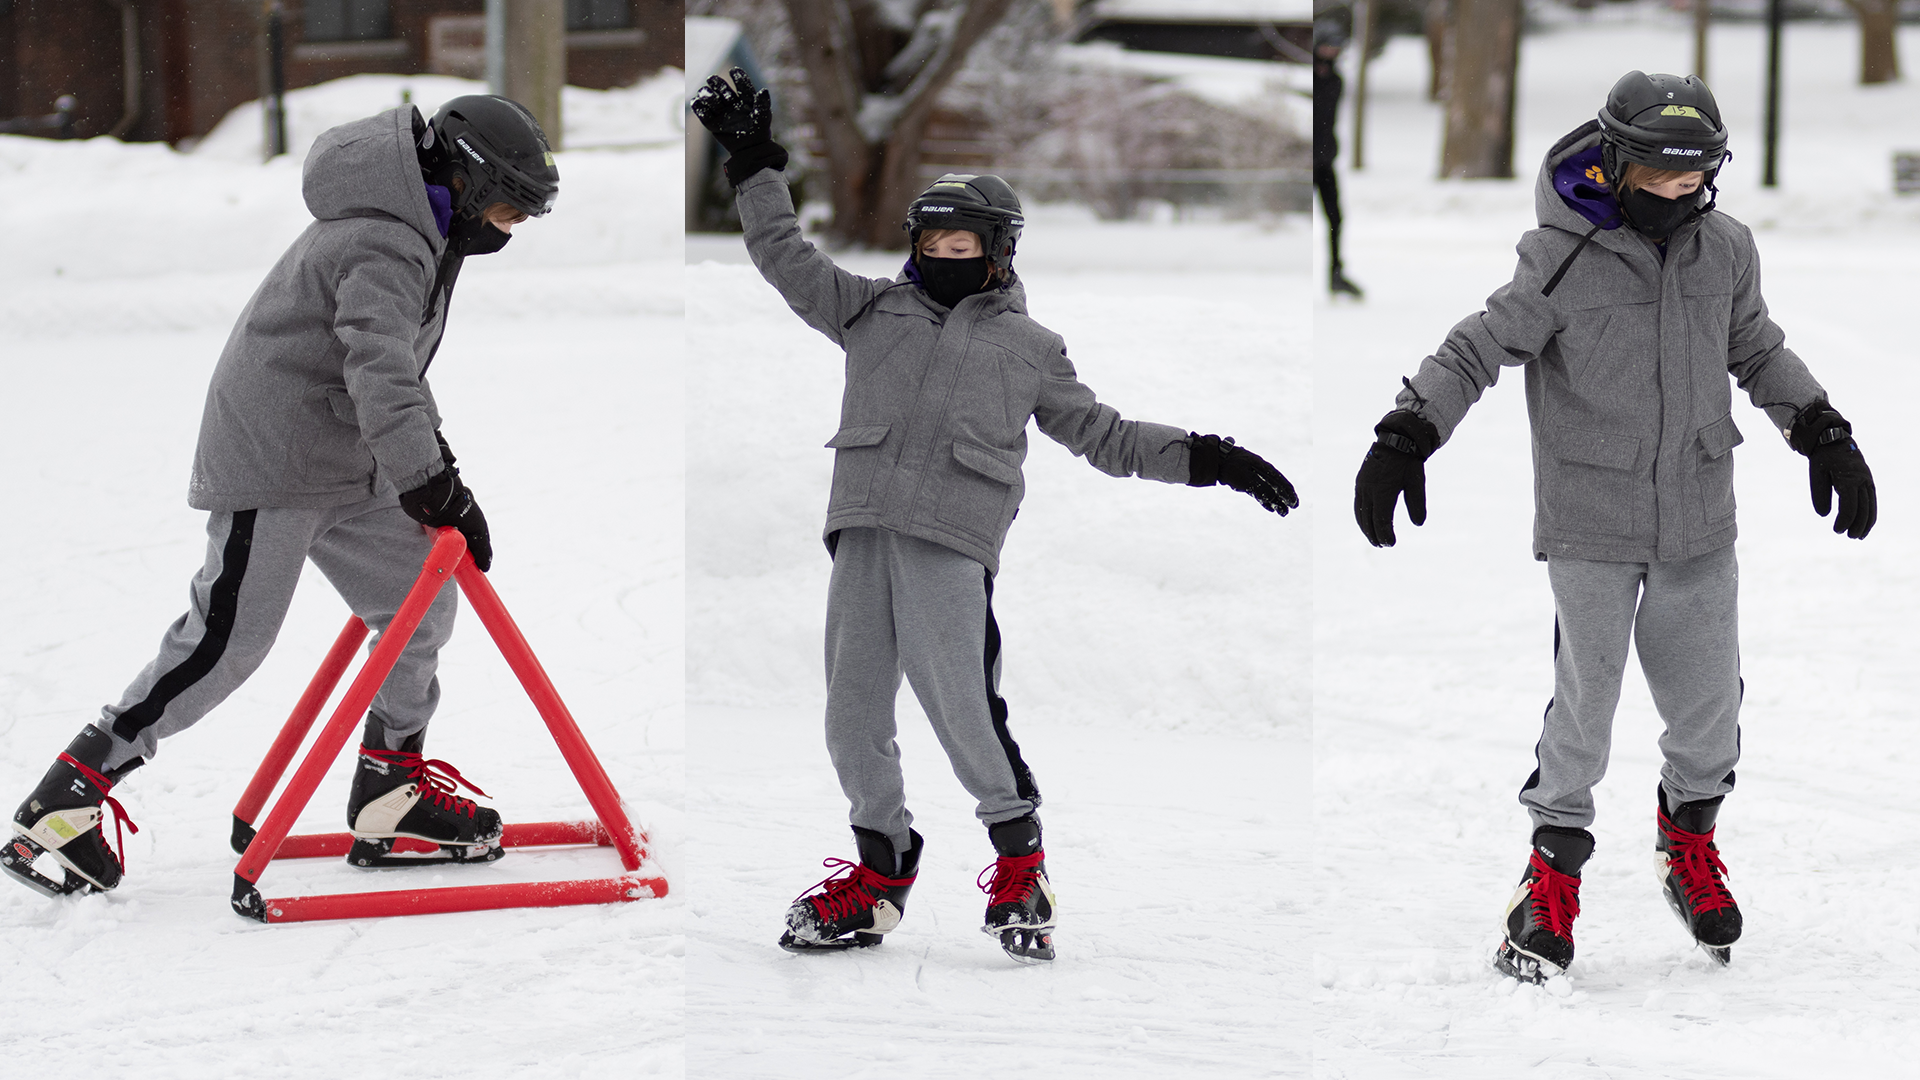 In three images, a student goes from struggling to skate, to finding their balance